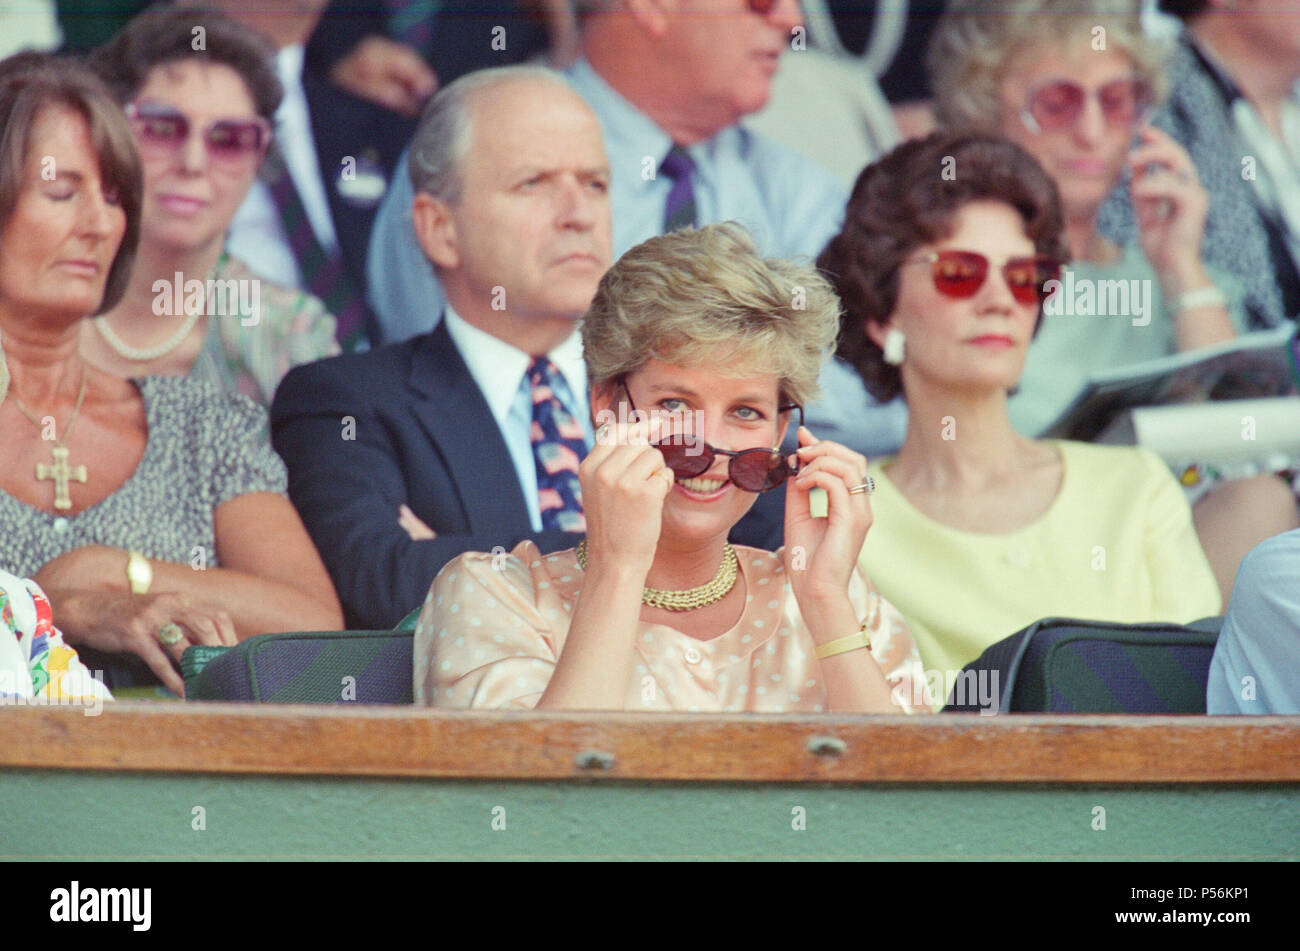 HRH The Princess of Wales, Princess Diana, attends the 1993 Men's Singles Wimbledon Tennis Final. She wears or attends to her sunglasses for most of the pictures on this sunny day as it was. The Princess is shown sitting next to her mother Frances Shand Kydd. Regarding the match, Pete Sampras defeated Jim Courier 7¿(7¿), 7¿(8¿), 3¿, 6¿in the final to win the Gentlemen's Singles title at the 1993 Wimbledon Championships. This was the first of Pete's Open Era record of seven Wimbledon titles.  Picture taken 4th July 1993 Stock Photo